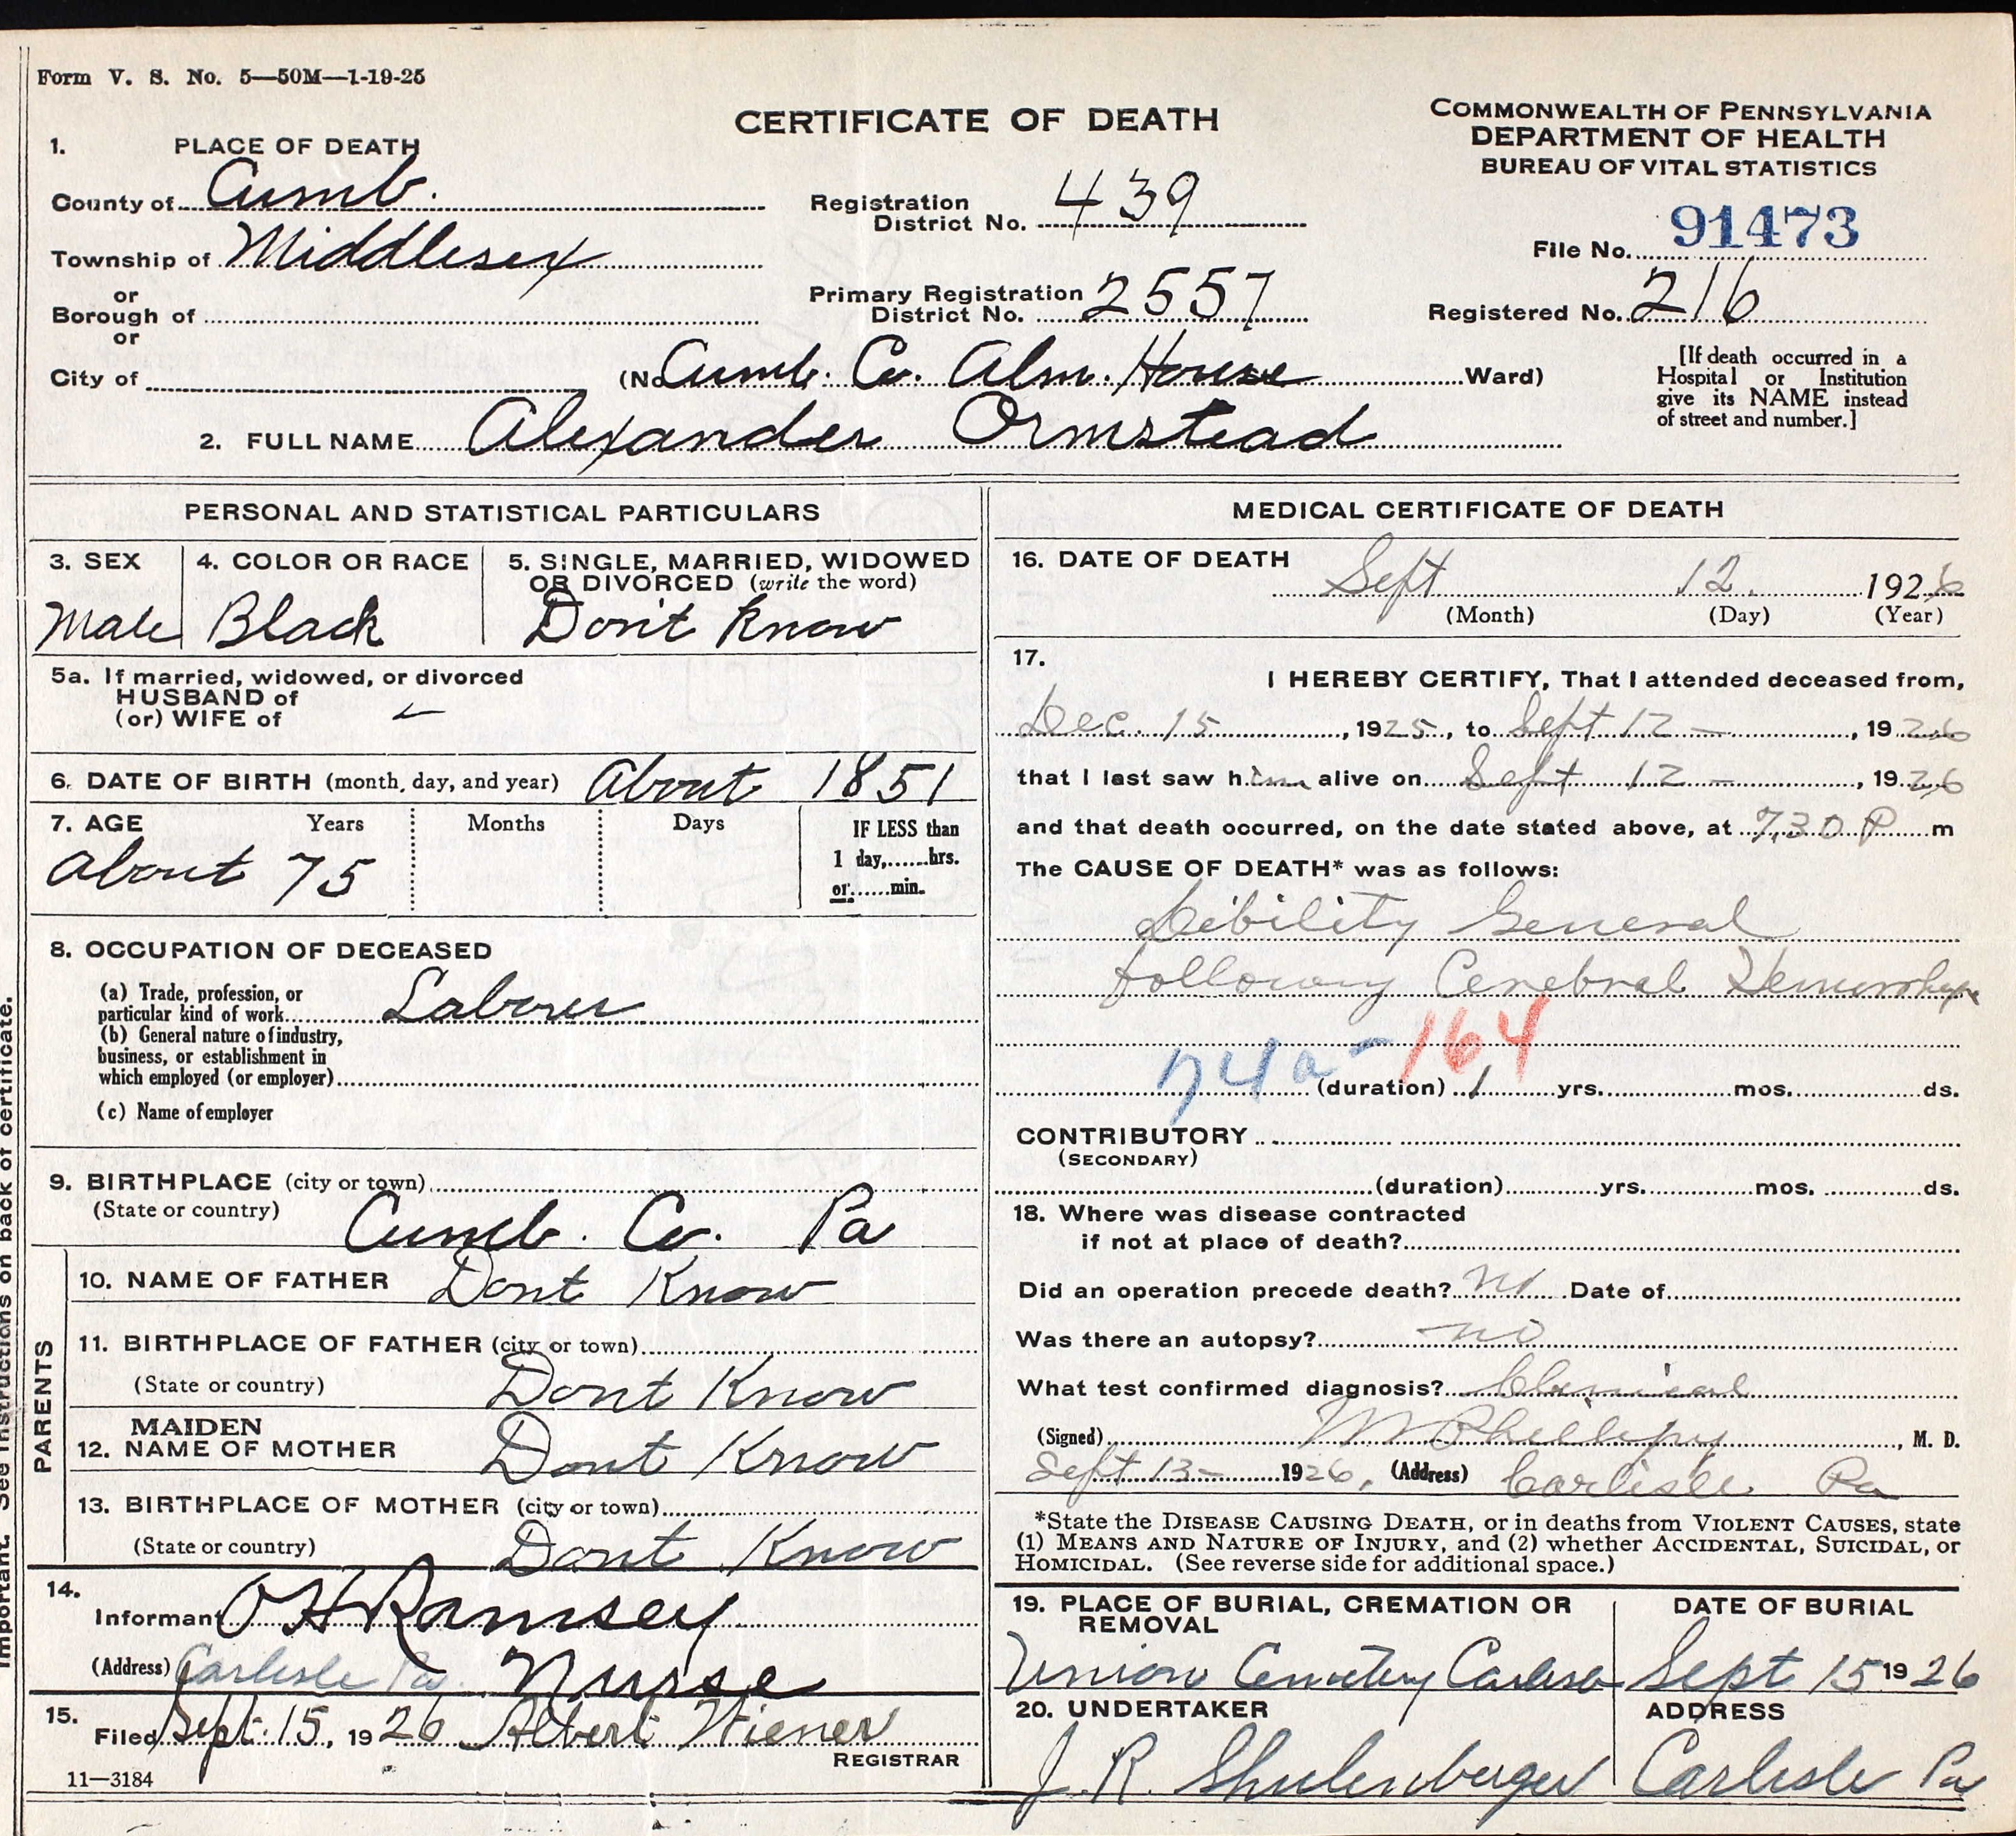 Picture of yellowed death certificate with cursive handwriting